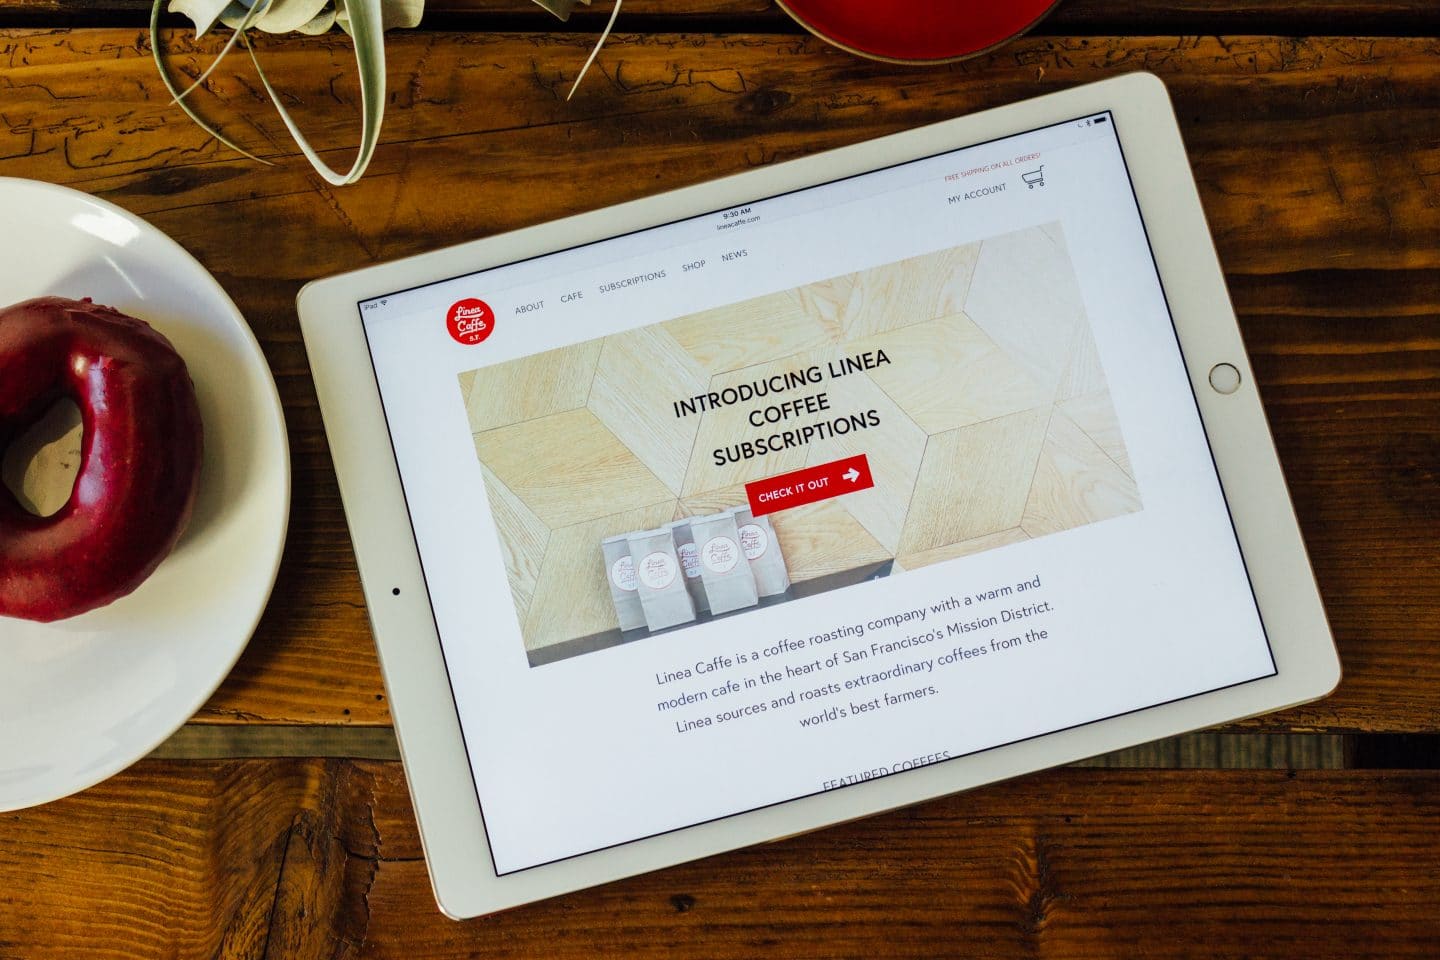 Home page of the responsive Linea Caffe website as shown on an iPad